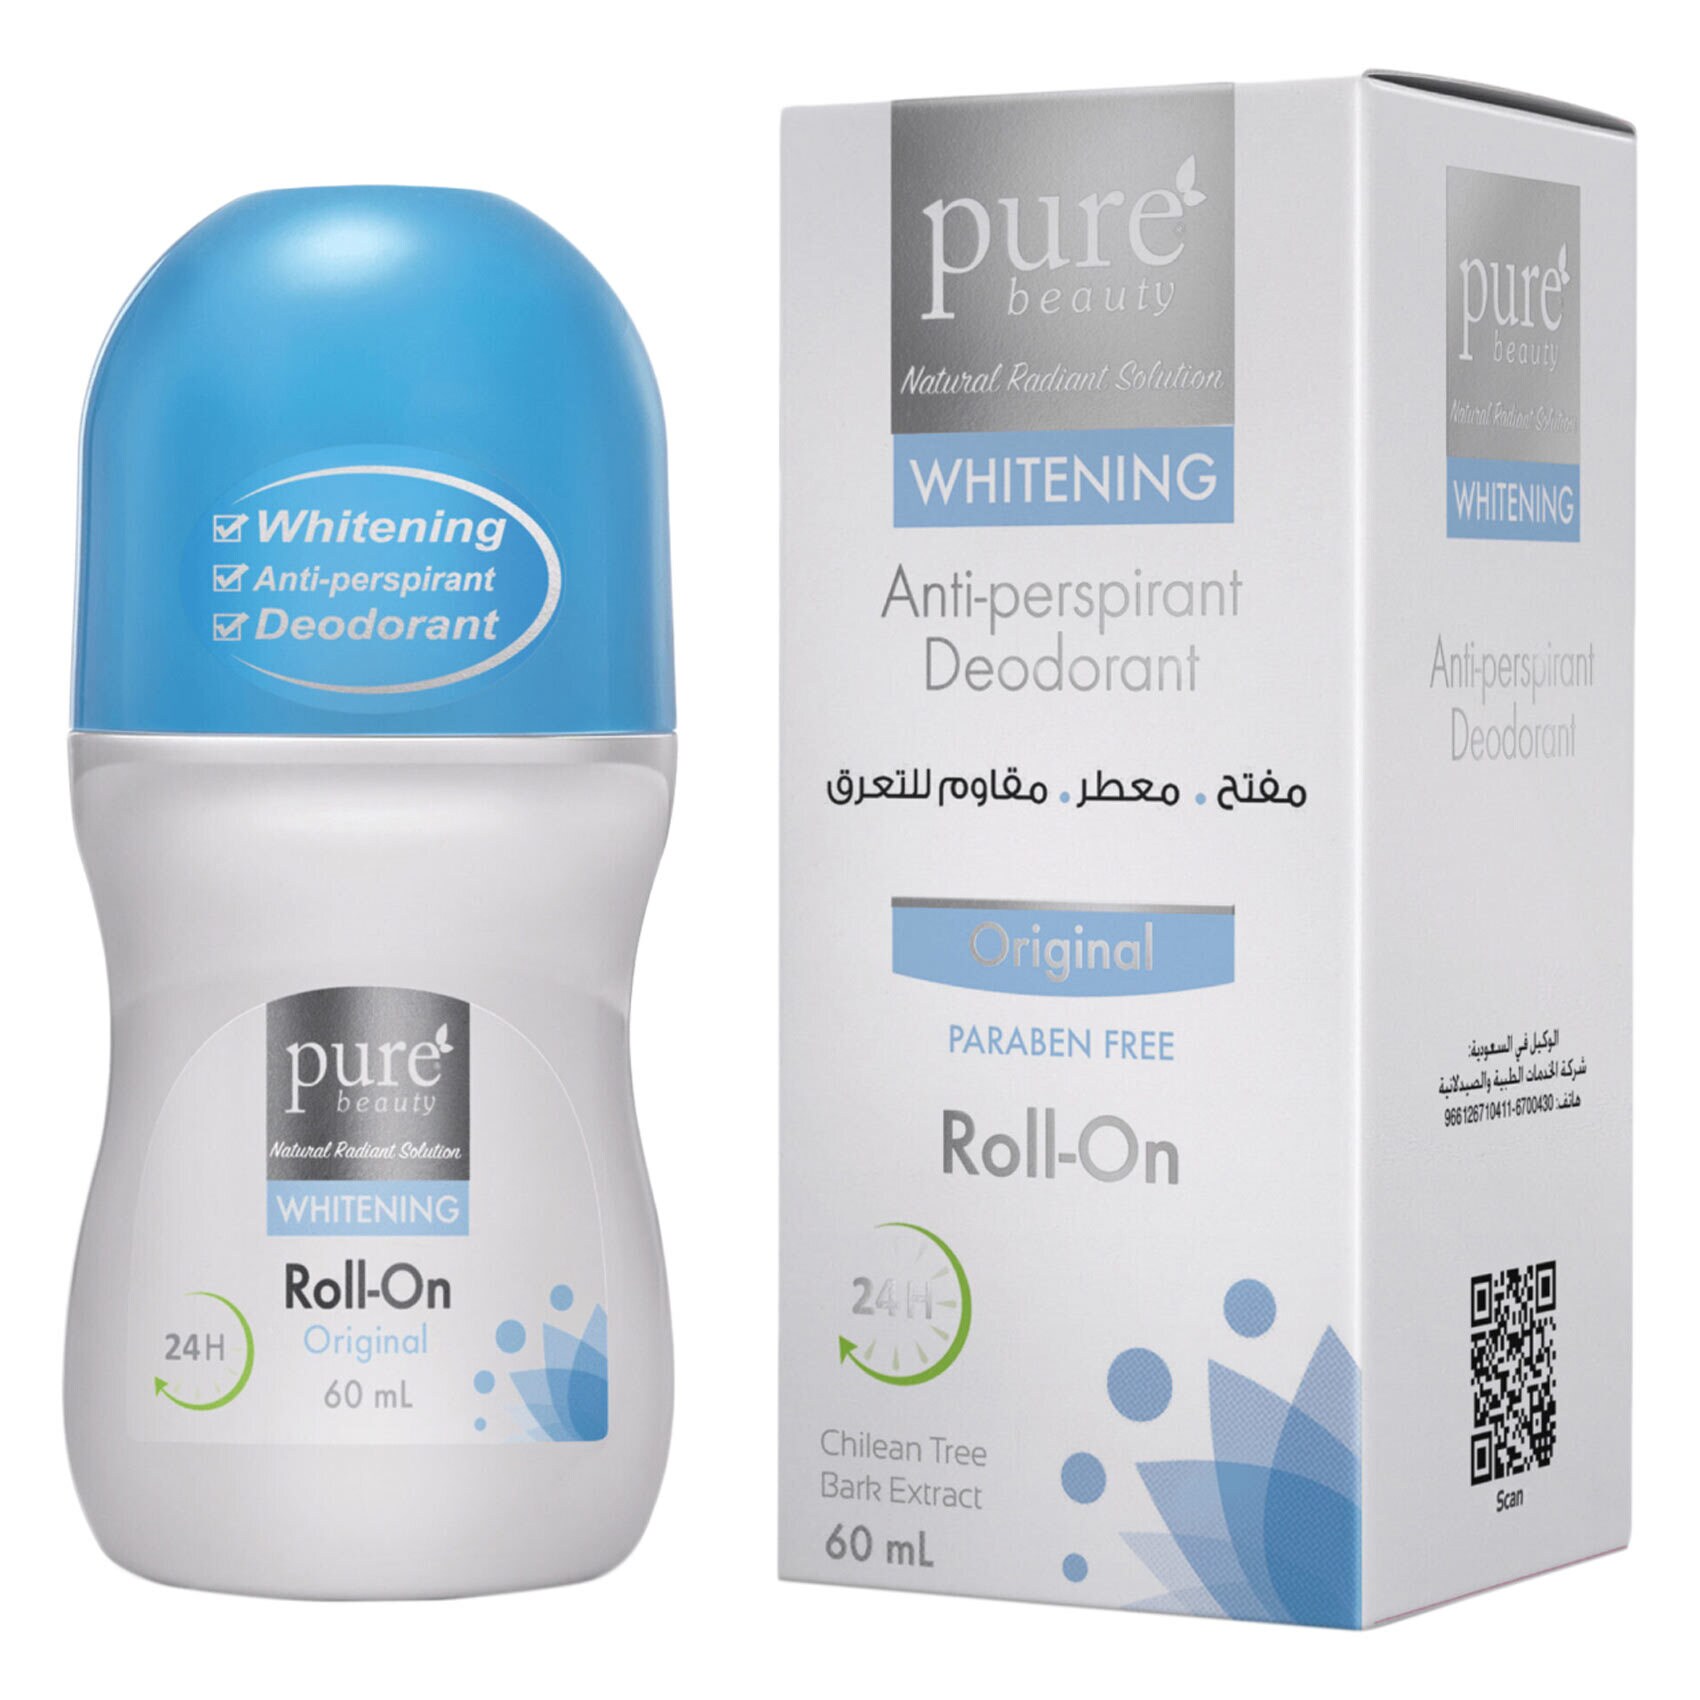 Pure Beauty Whitening Anti-perspirant Fragnance Free Roll-On Deodorant -  60ml